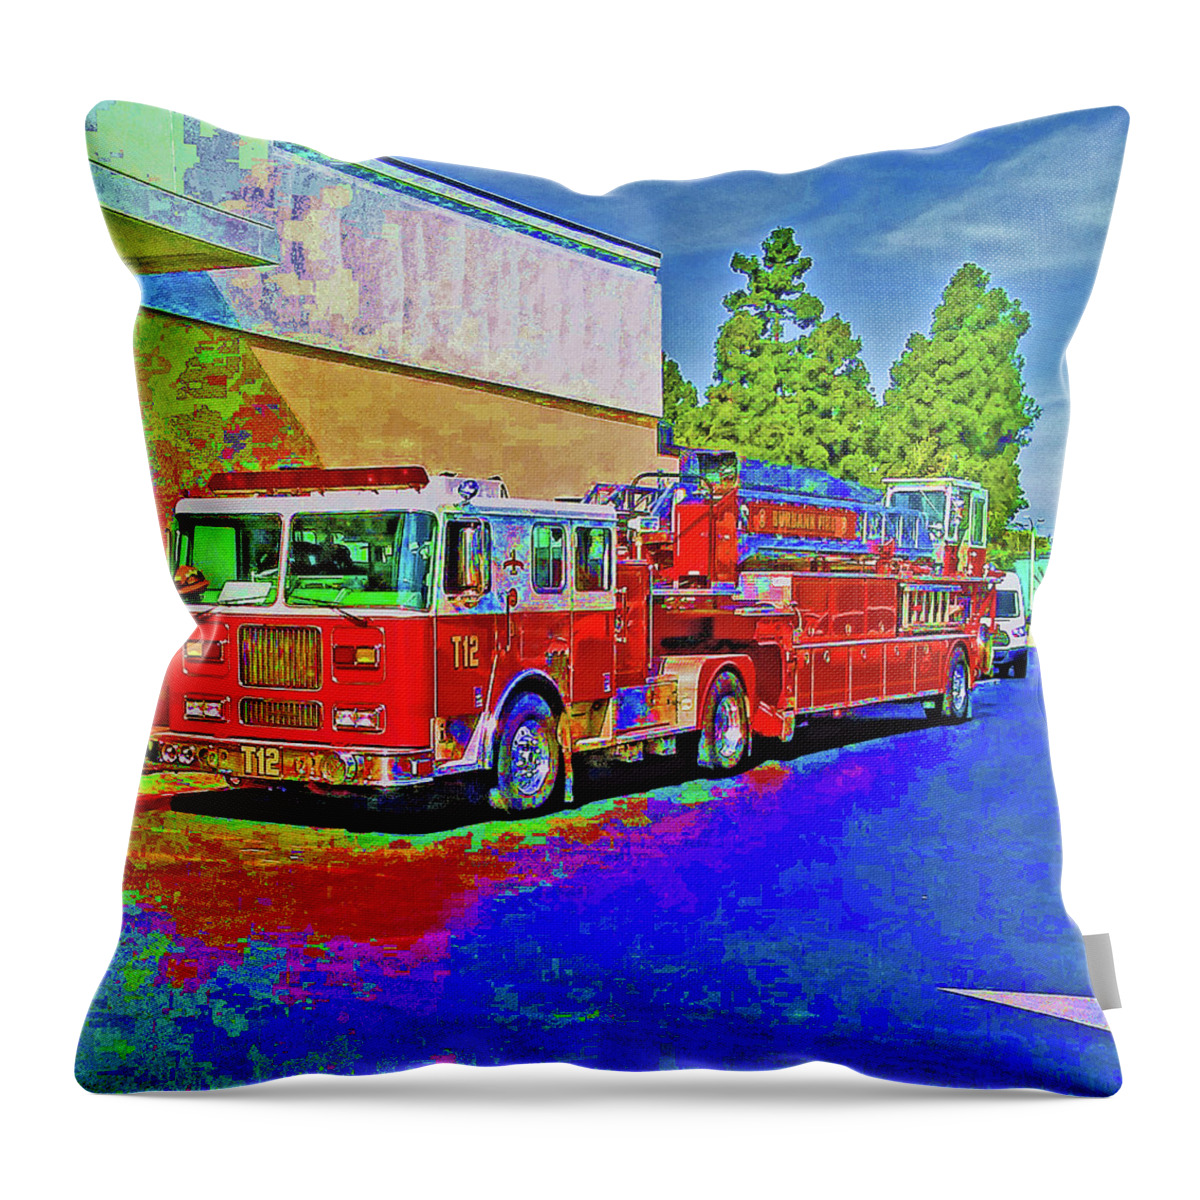 Abstract Throw Pillow featuring the photograph Abstract Fire Engine by Andrew Lawrence